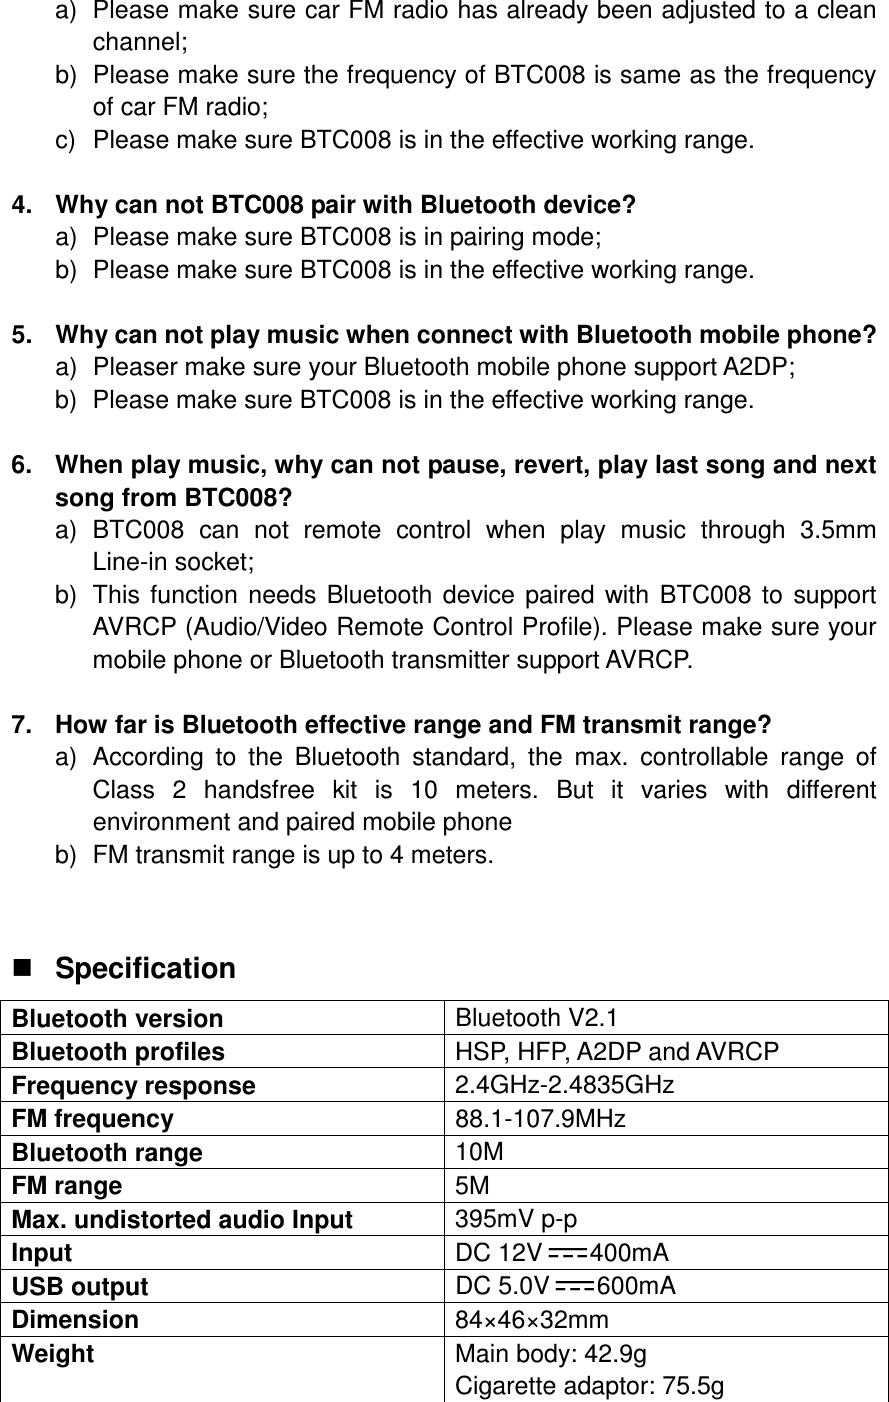 a)  Please make sure car FM radio has already been adjusted to a clean channel; b)  Please make sure the frequency of BTC008 is same as the frequency of car FM radio; c)  Please make sure BTC008 is in the effective working range.  4.  Why can not BTC008 pair with Bluetooth device? a)  Please make sure BTC008 is in pairing mode; b)  Please make sure BTC008 is in the effective working range.  5.  Why can not play music when connect with Bluetooth mobile phone? a)  Pleaser make sure your Bluetooth mobile phone support A2DP; b)  Please make sure BTC008 is in the effective working range.      6.  When play music, why can not pause, revert, play last song and next song from BTC008? a)  BTC008  can  not  remote  control  when  play  music  through  3.5mm Line-in socket; b)  This function needs Bluetooth device paired with  BTC008 to  support AVRCP (Audio/Video Remote Control Profile). Please make sure your mobile phone or Bluetooth transmitter support AVRCP.    7.  How far is Bluetooth effective range and FM transmit range? a)  According  to  the  Bluetooth  standard,  the  max.  controllable  range  of Class  2  handsfree  kit  is  10  meters.  But  it  varies  with  different environment and paired mobile phone b)  FM transmit range is up to 4 meters.   Specification Bluetooth version  Bluetooth V2.1 Bluetooth profiles  HSP, HFP, A2DP and AVRCP Frequency response  2.4GHz-2.4835GHz FM frequency  88.1-107.9MHz Bluetooth range  10M FM range  5M Max. undistorted audio Input  395mV p-p Input  DC 12V 400mA USB output  DC 5.0V 600mA Dimension  84×46×32mm Weight  Main body: 42.9g Cigarette adaptor: 75.5g  